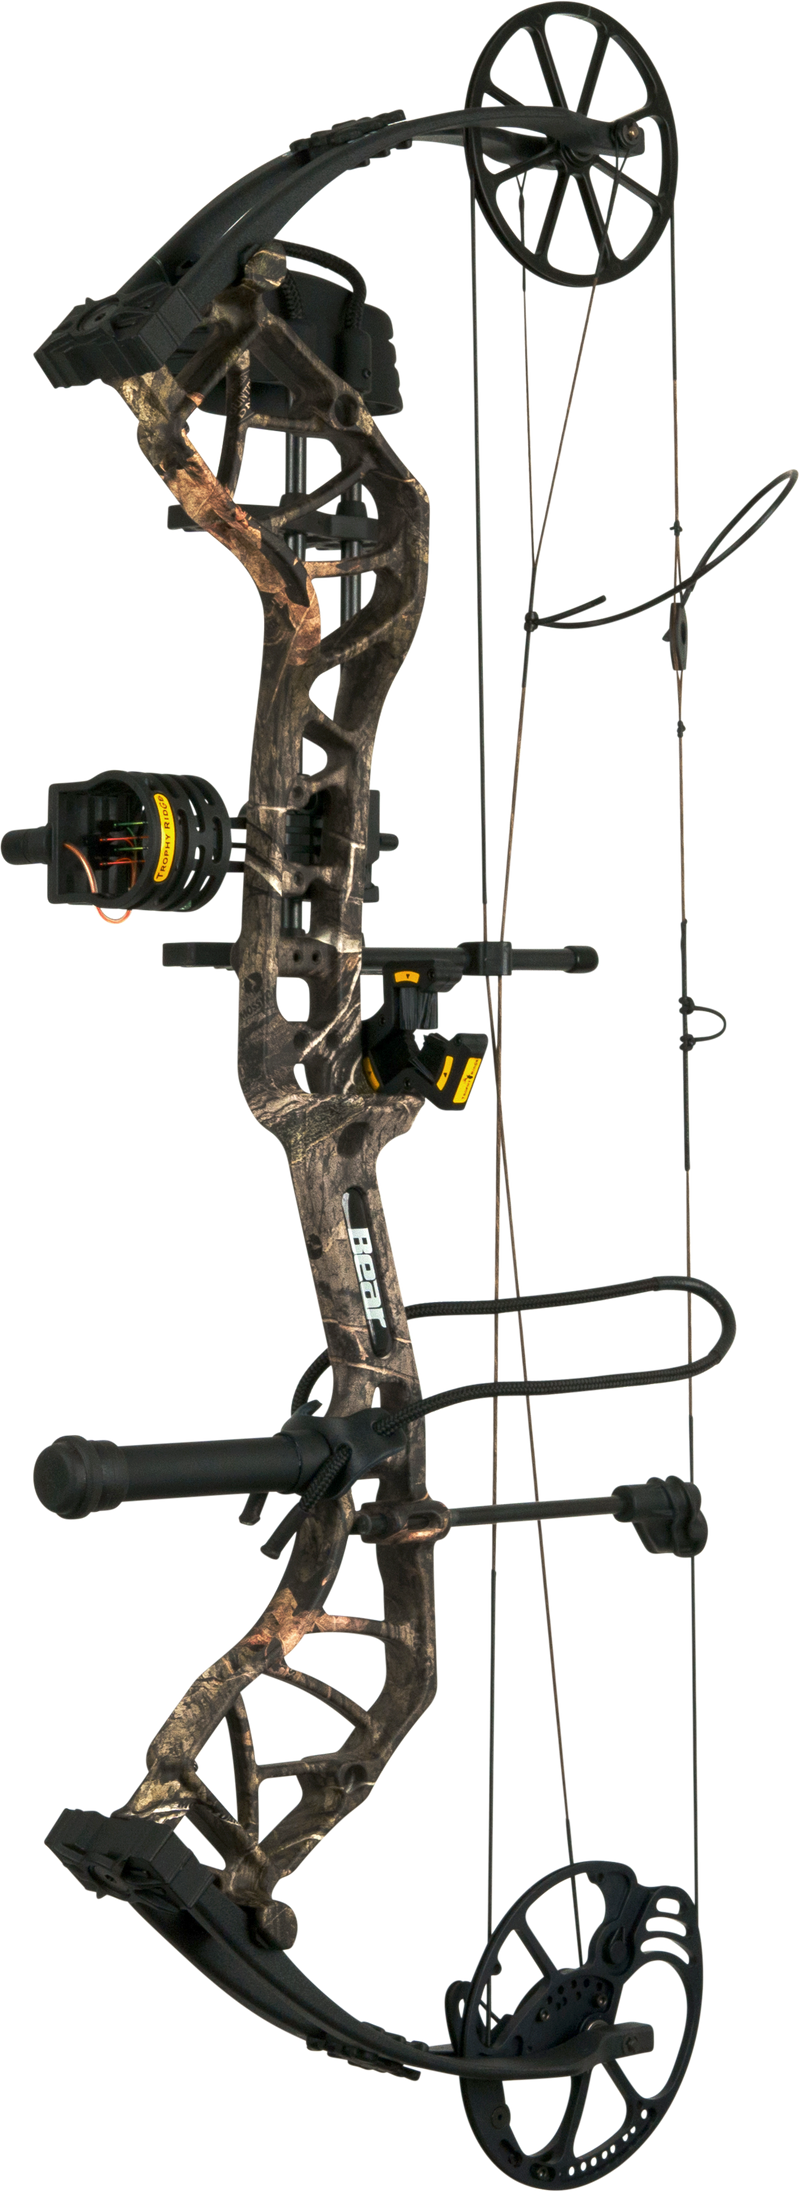 Bear Species EV RTH Compound Bow - Mossy Oak Country DNA Bear Species Bow